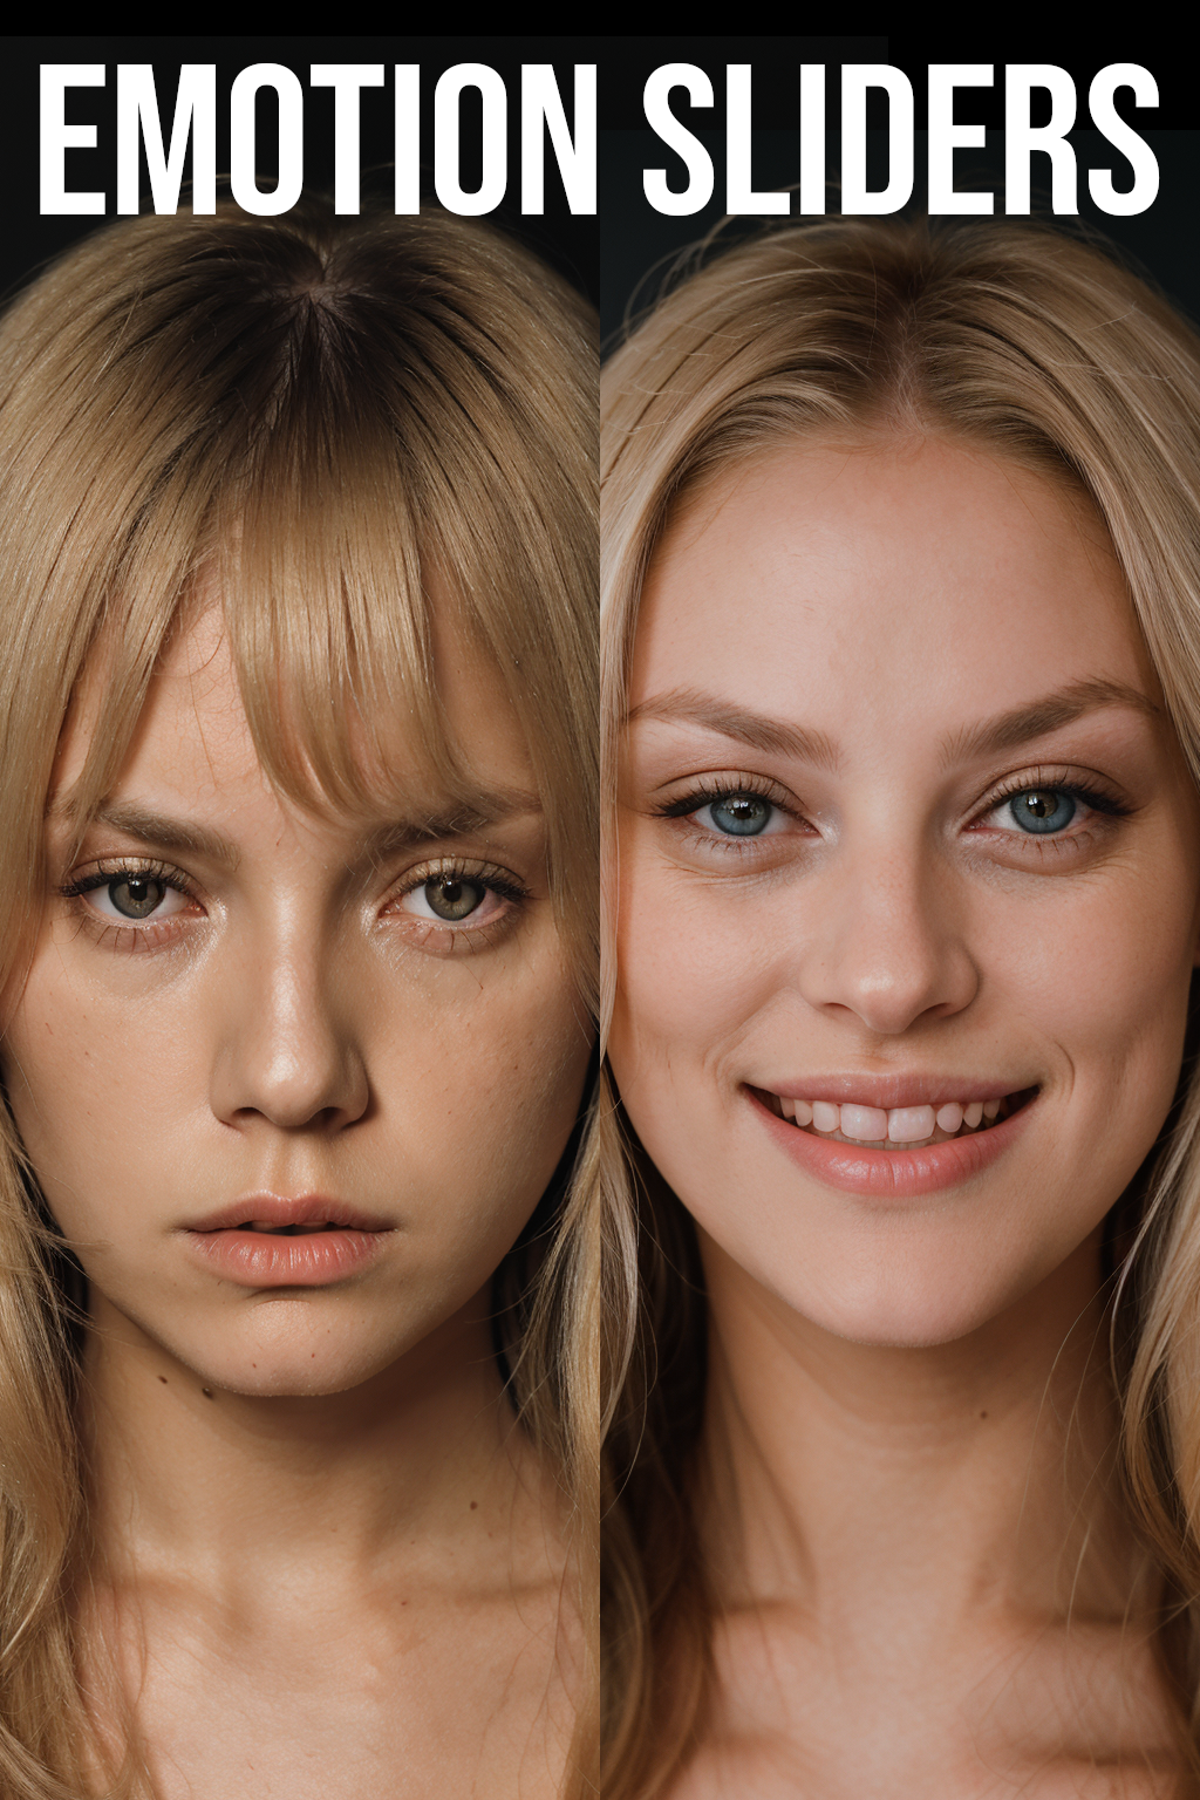 Two Blonde Women Smiling: A Comparison of Their Facial Features